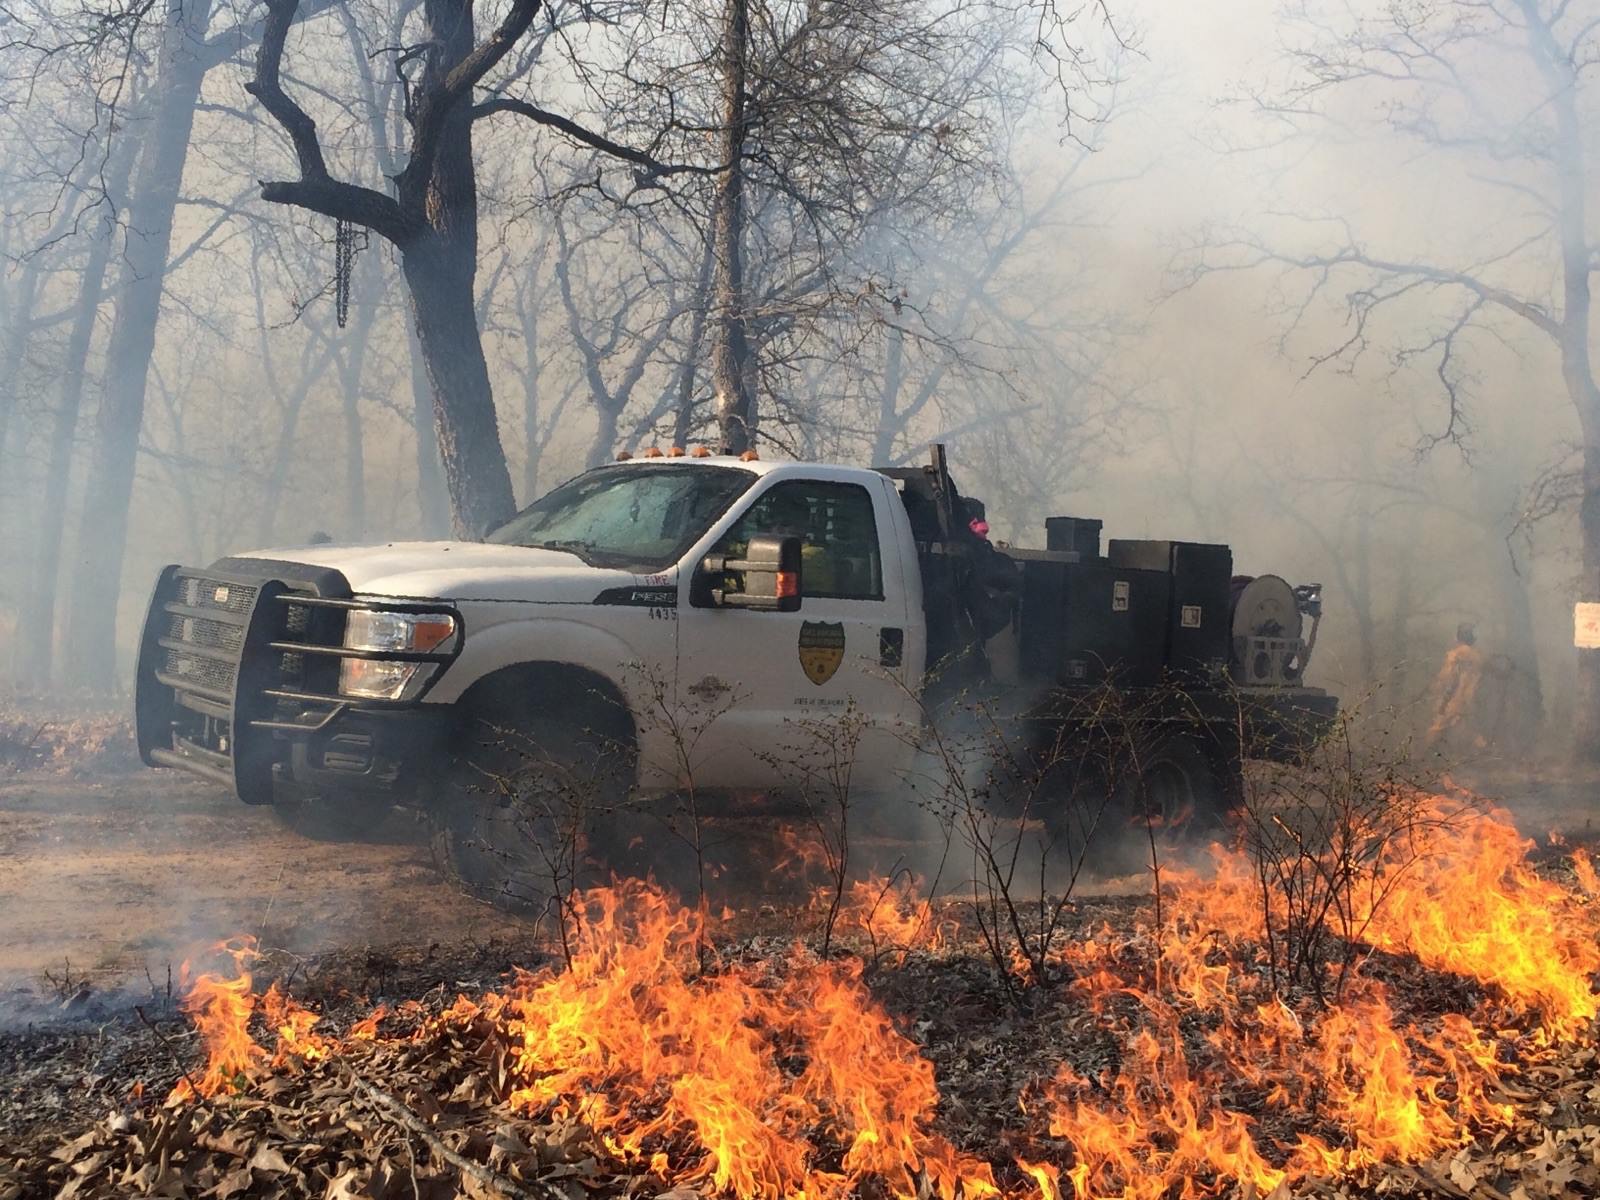 More Than 460,000 Acres Burned in Over 1,000 Wildfires Across the State During a Dry, Windy 2018